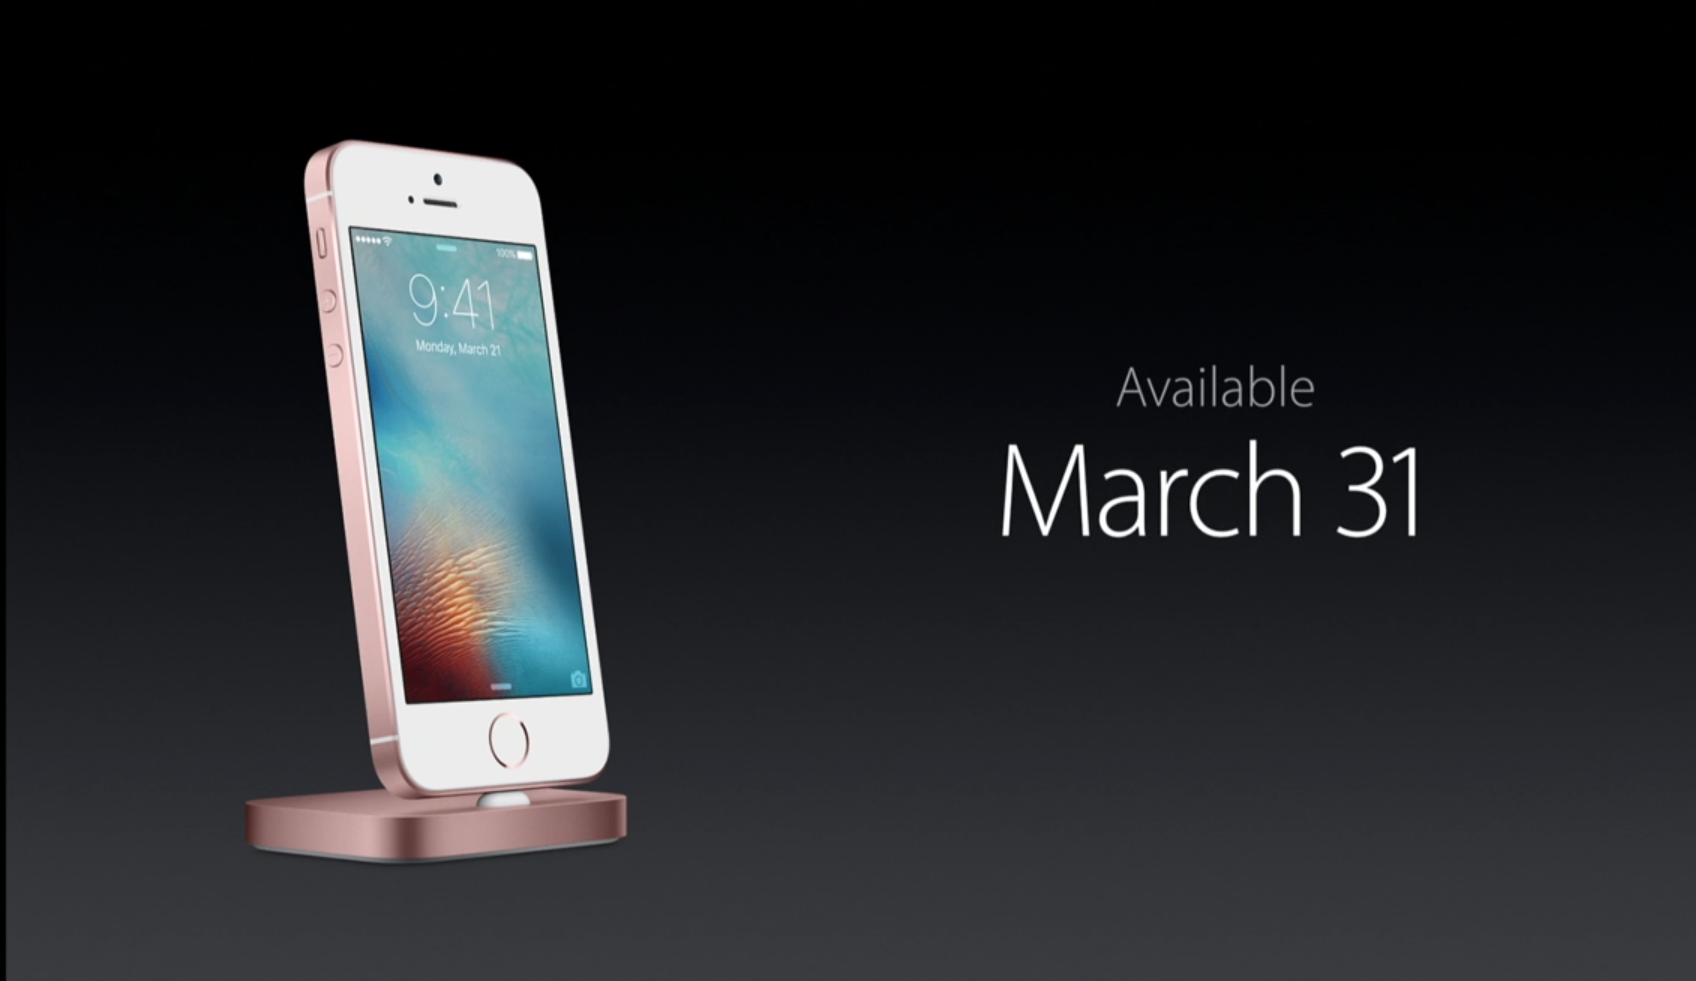 iPhone SE to become available from March 31, 2016